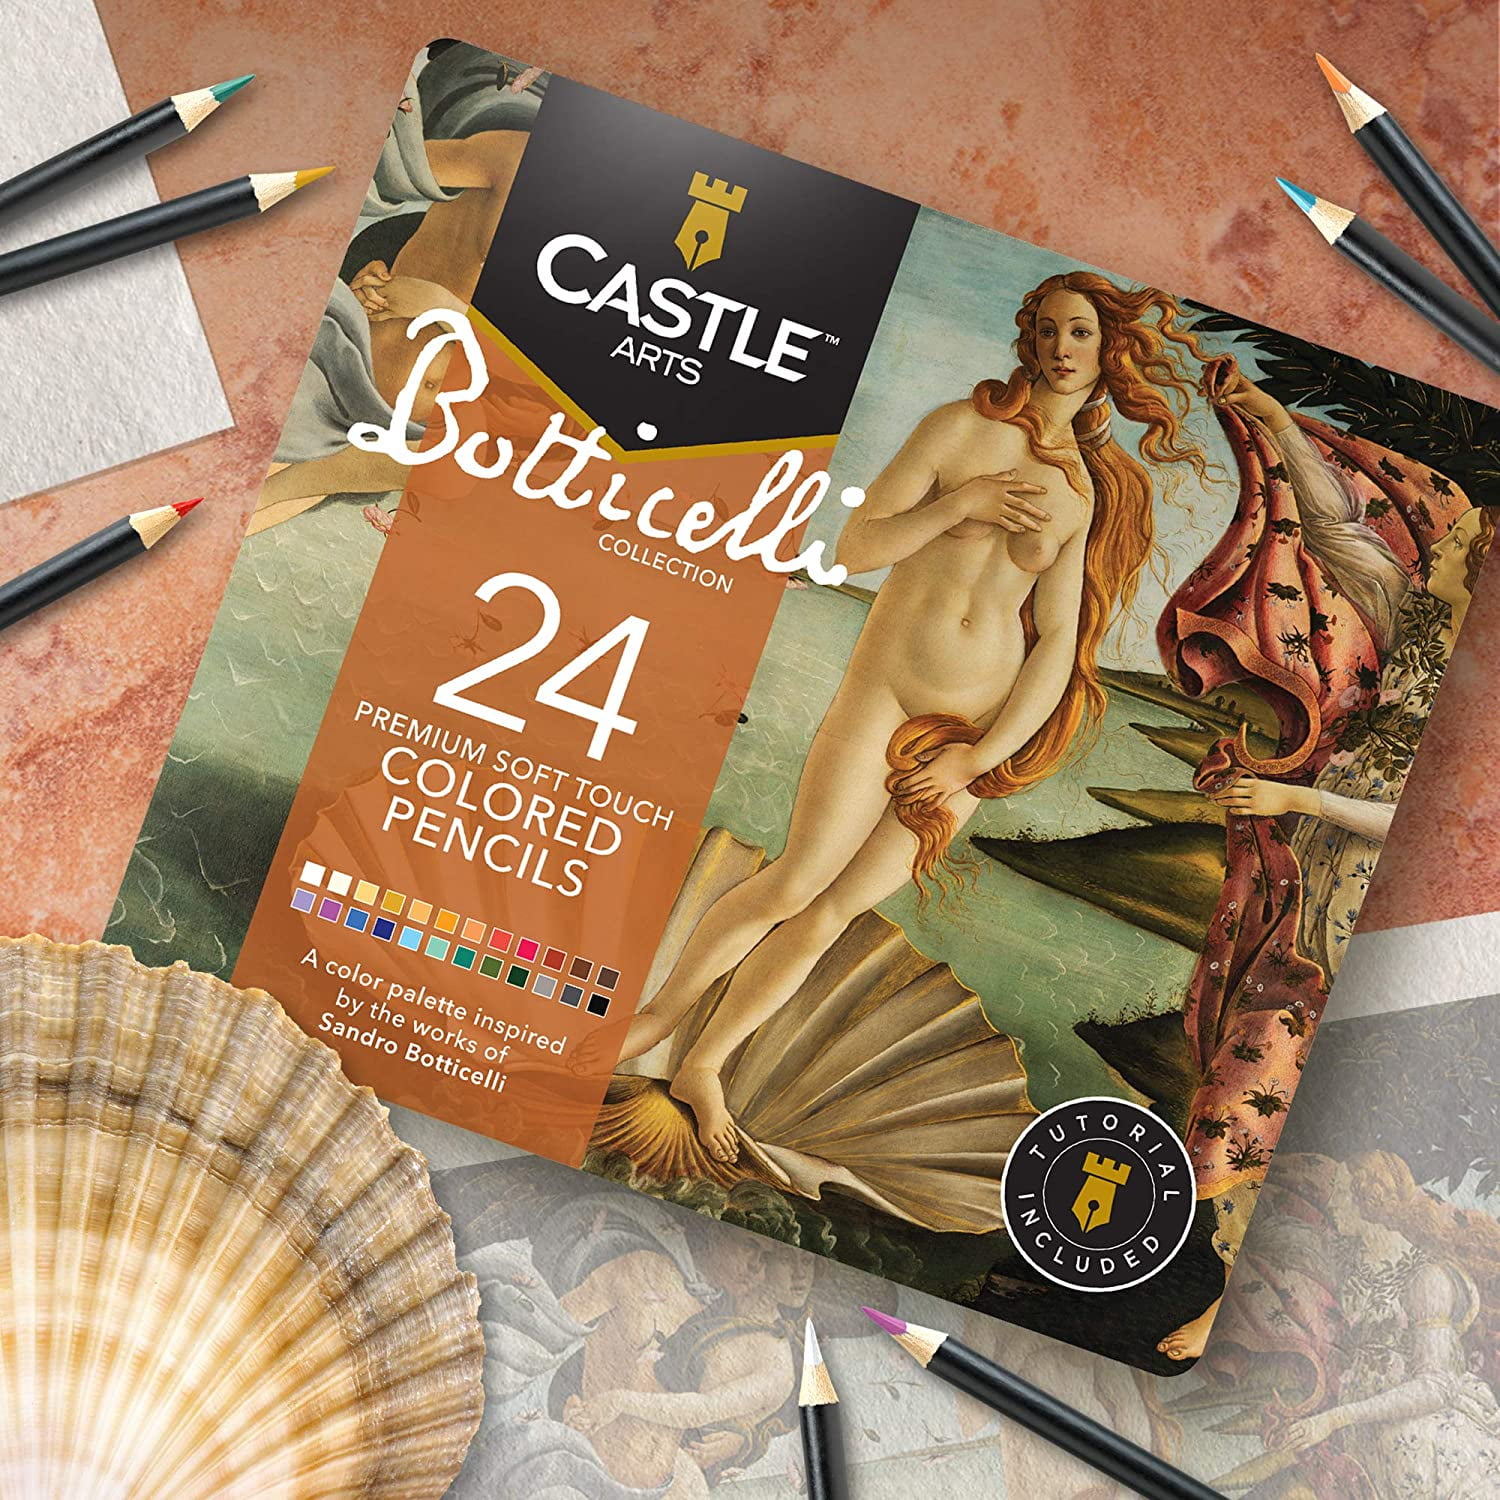 Castle Arts Themed 24 Colored Pencil Set in Tin Box, perfect 'Kandinsky'  inspired colors. Featuring quality, smooth colored cores, superior blending  